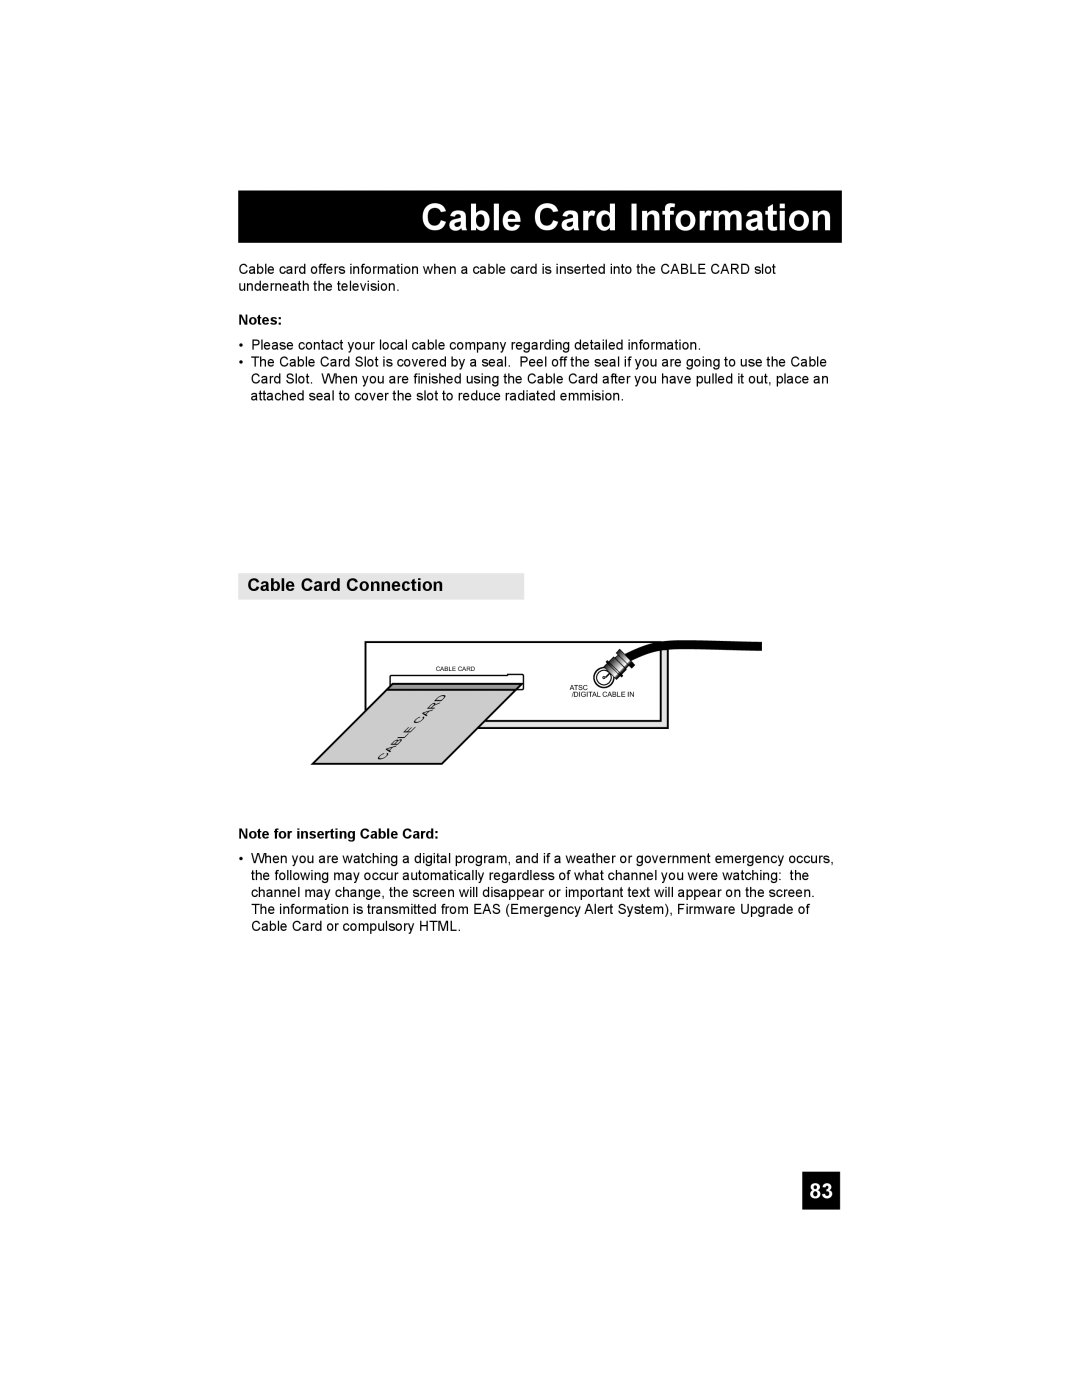 JVC PD-42X776 manual Cable Card Information, Cable Card Connection, Note for inserting Cable Card 